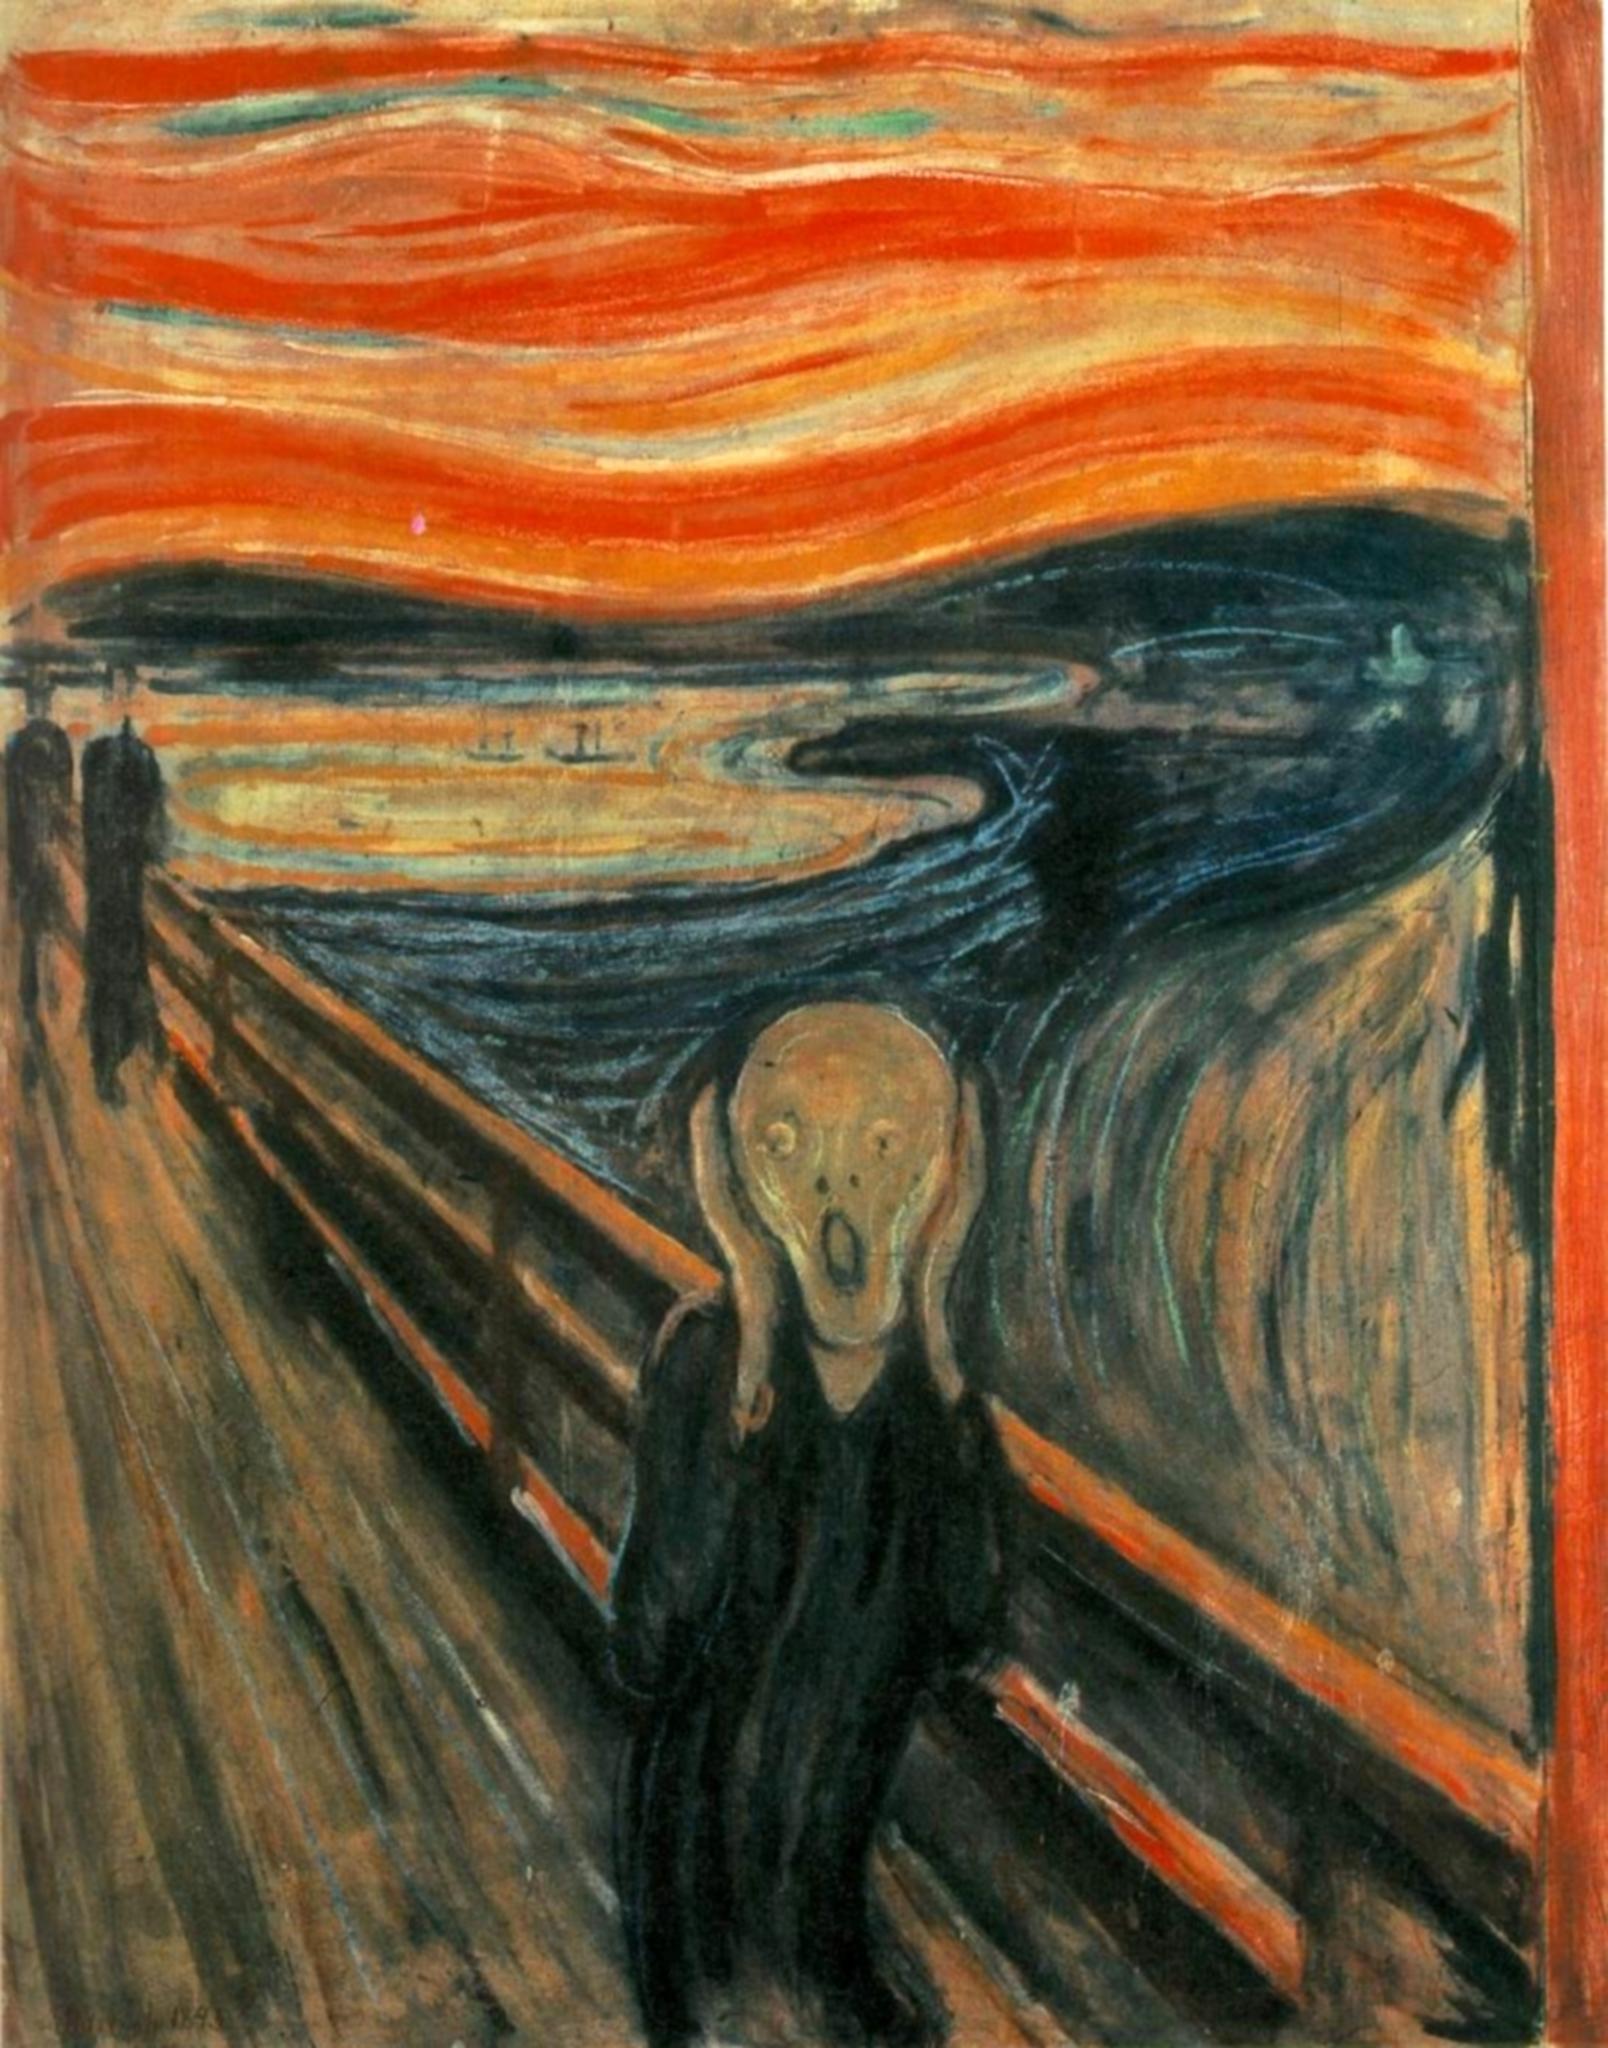 Edvard Munch’s famous painting The Scream was inspired by vivid red sunsets caused by a volcanic eruption.